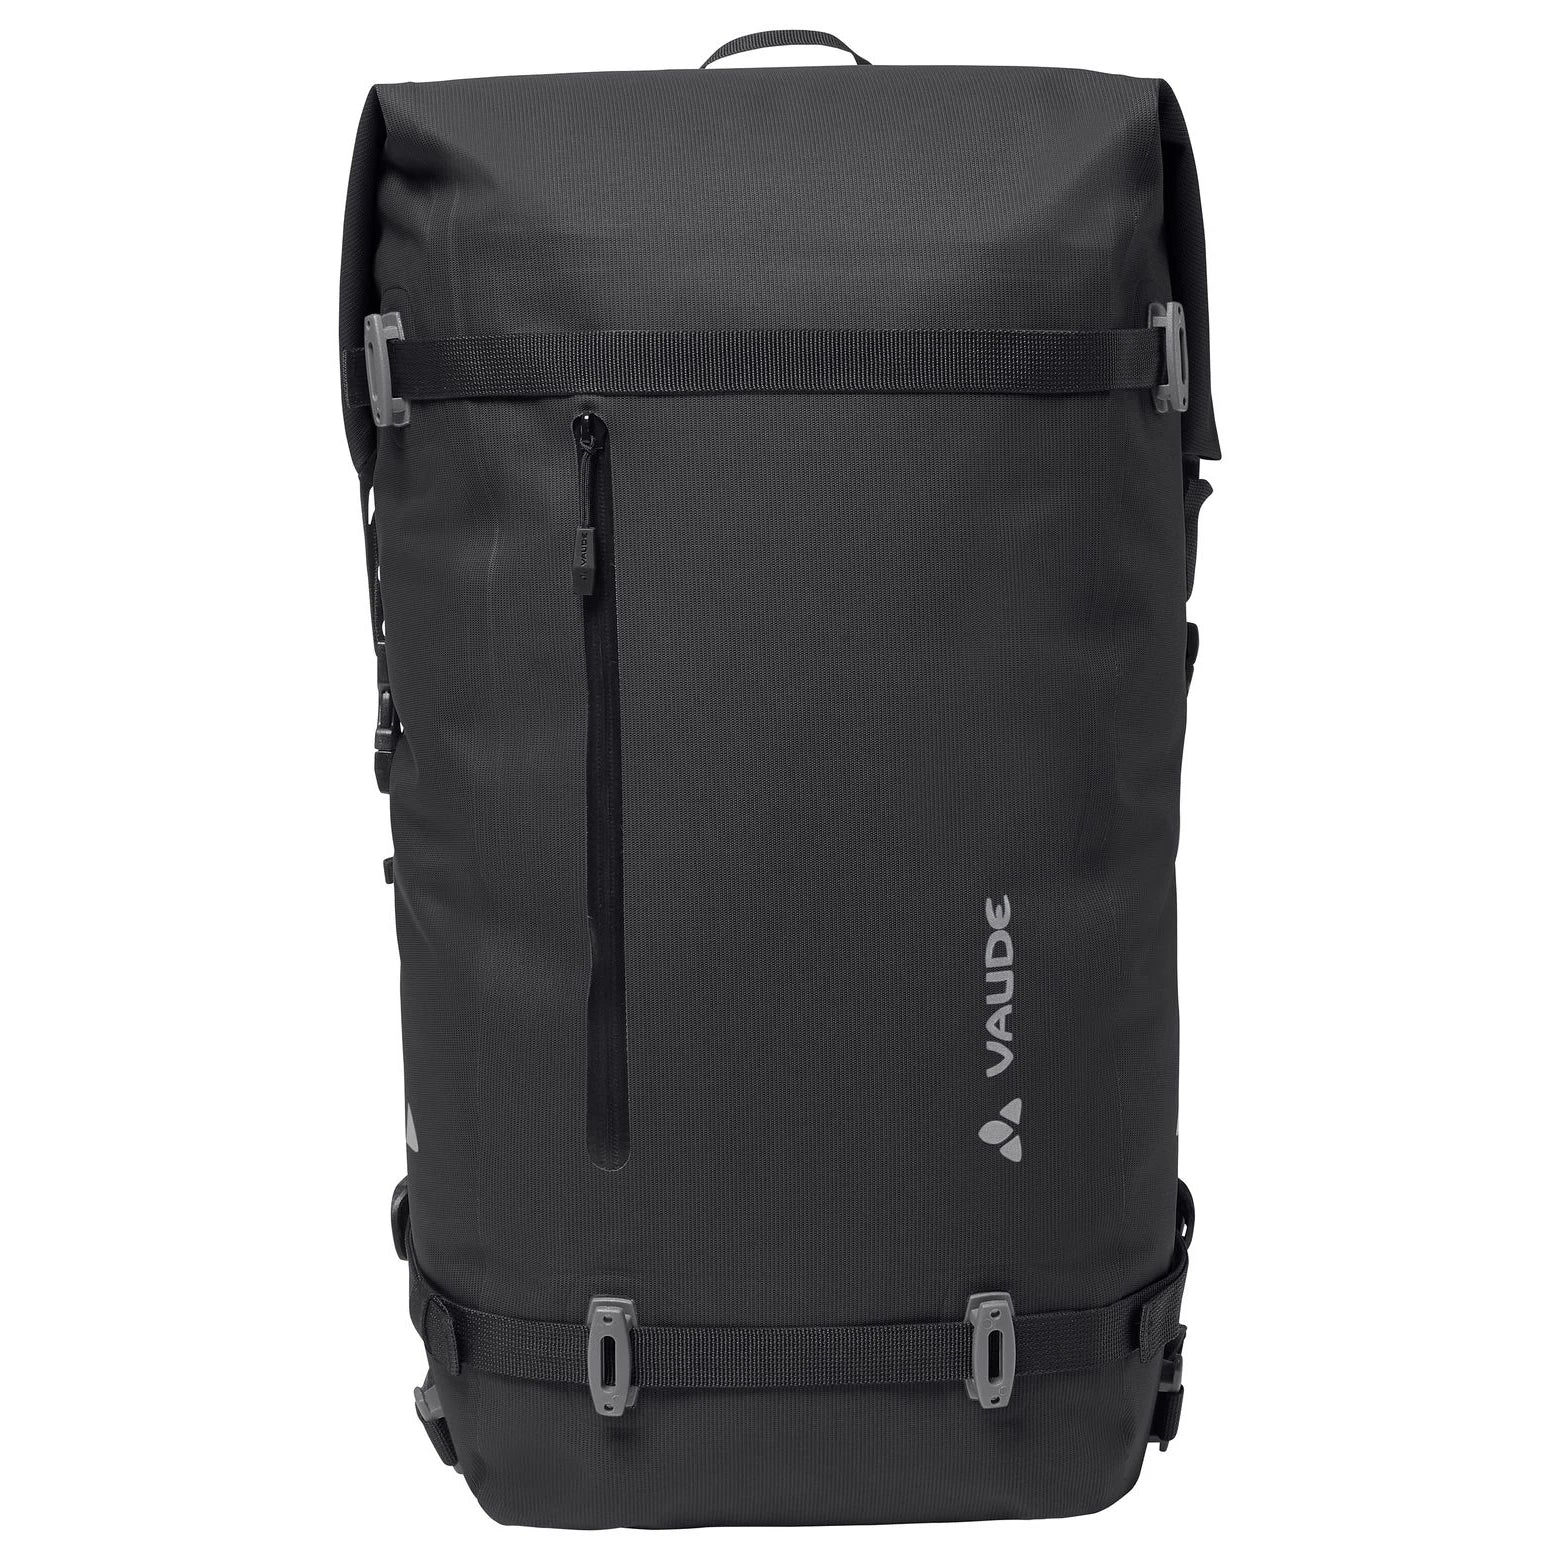 Vaude Made in Germany Proof 22 Sac à dos 48 cm - Noir